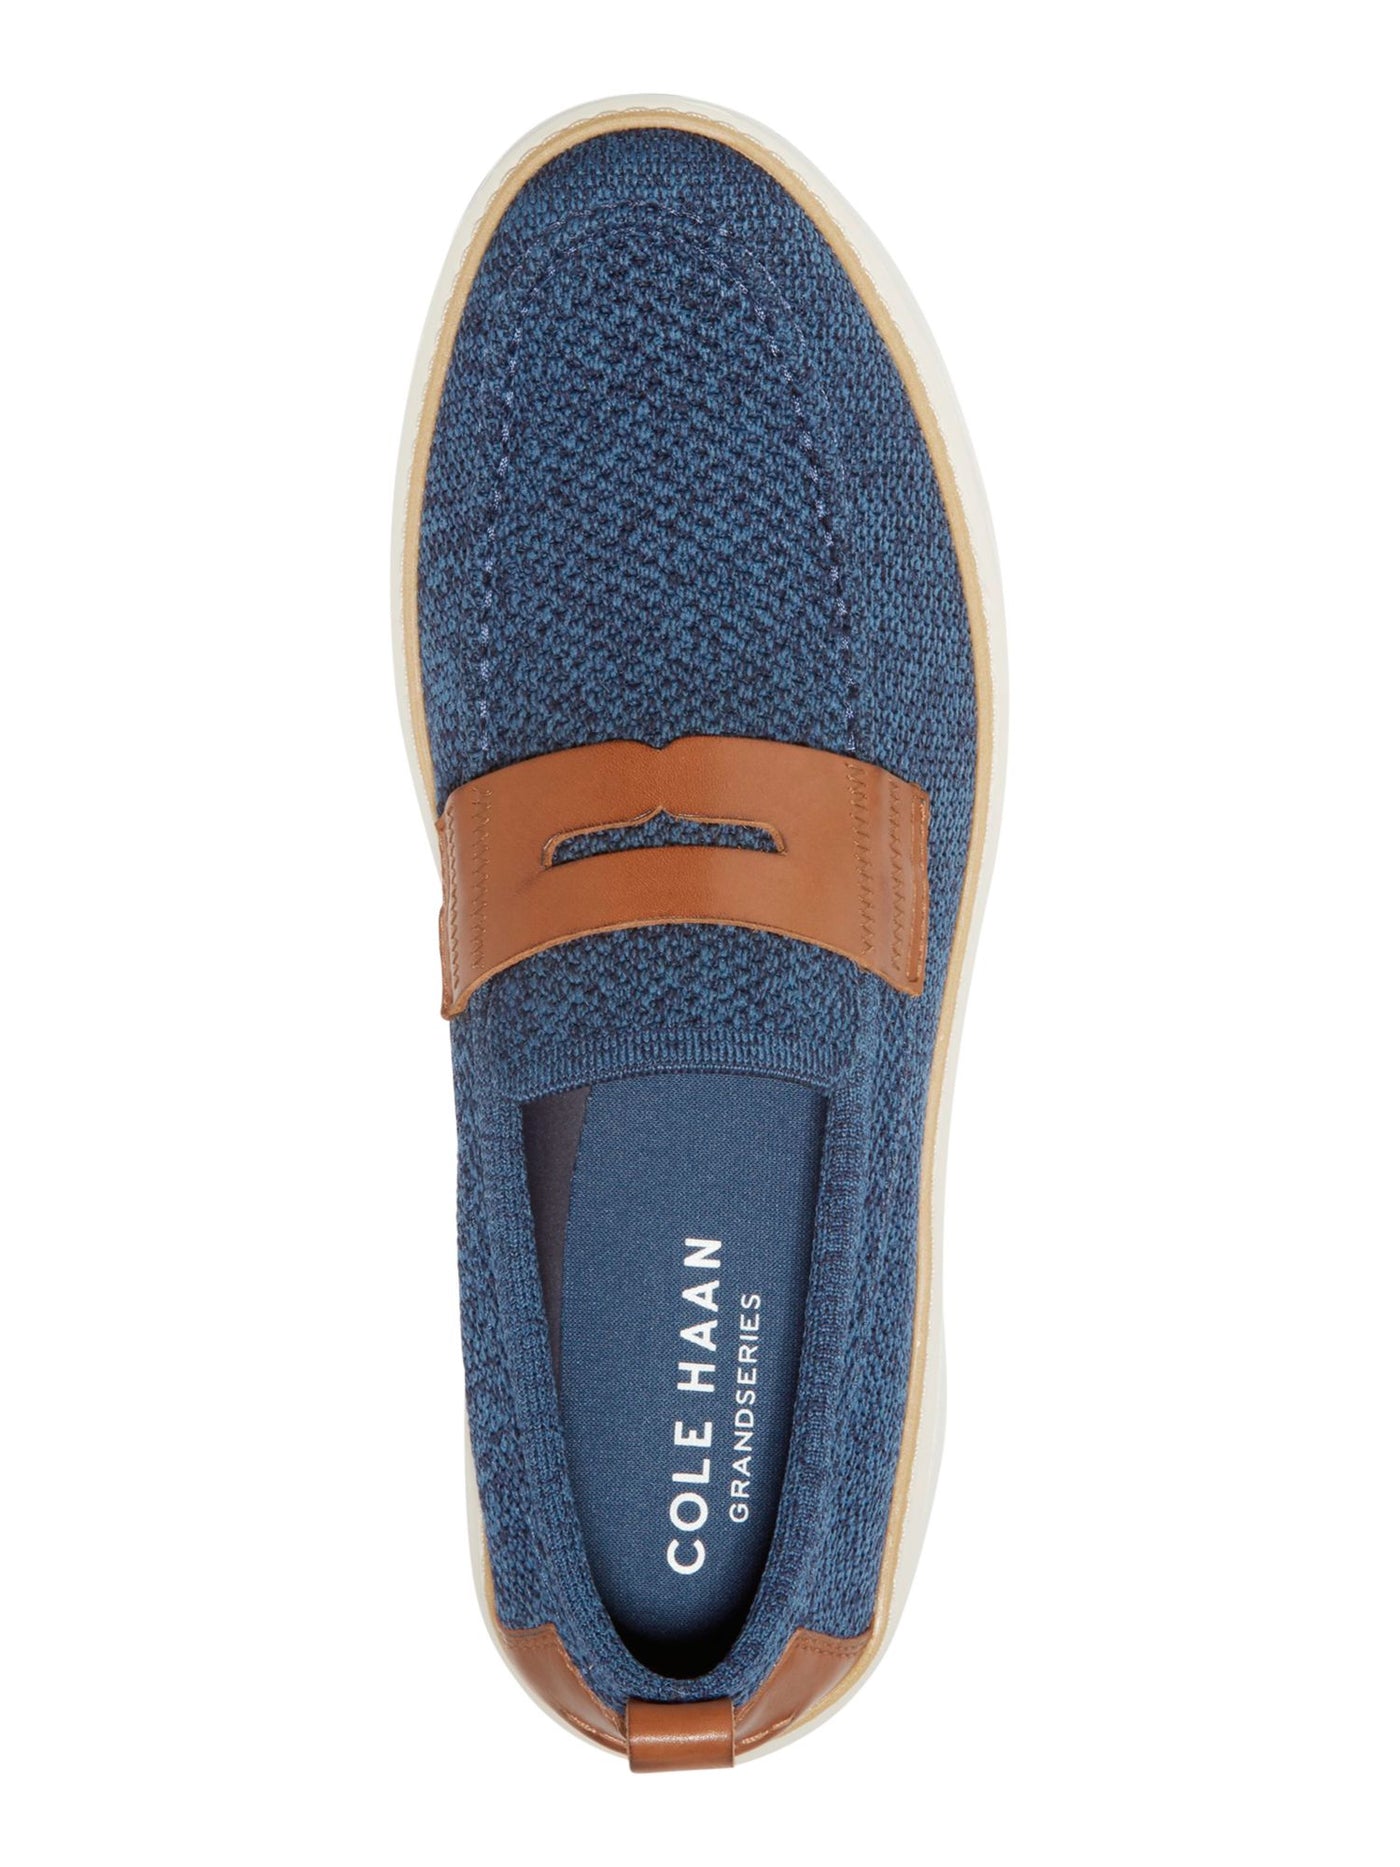 COLE HAAN GRANDSERIES Mens Blue Knit Contrast Penny Keeper Back Pull-Tab Cushioned Topspin Round Toe Wedge Slip On Loafers Shoes 8 M